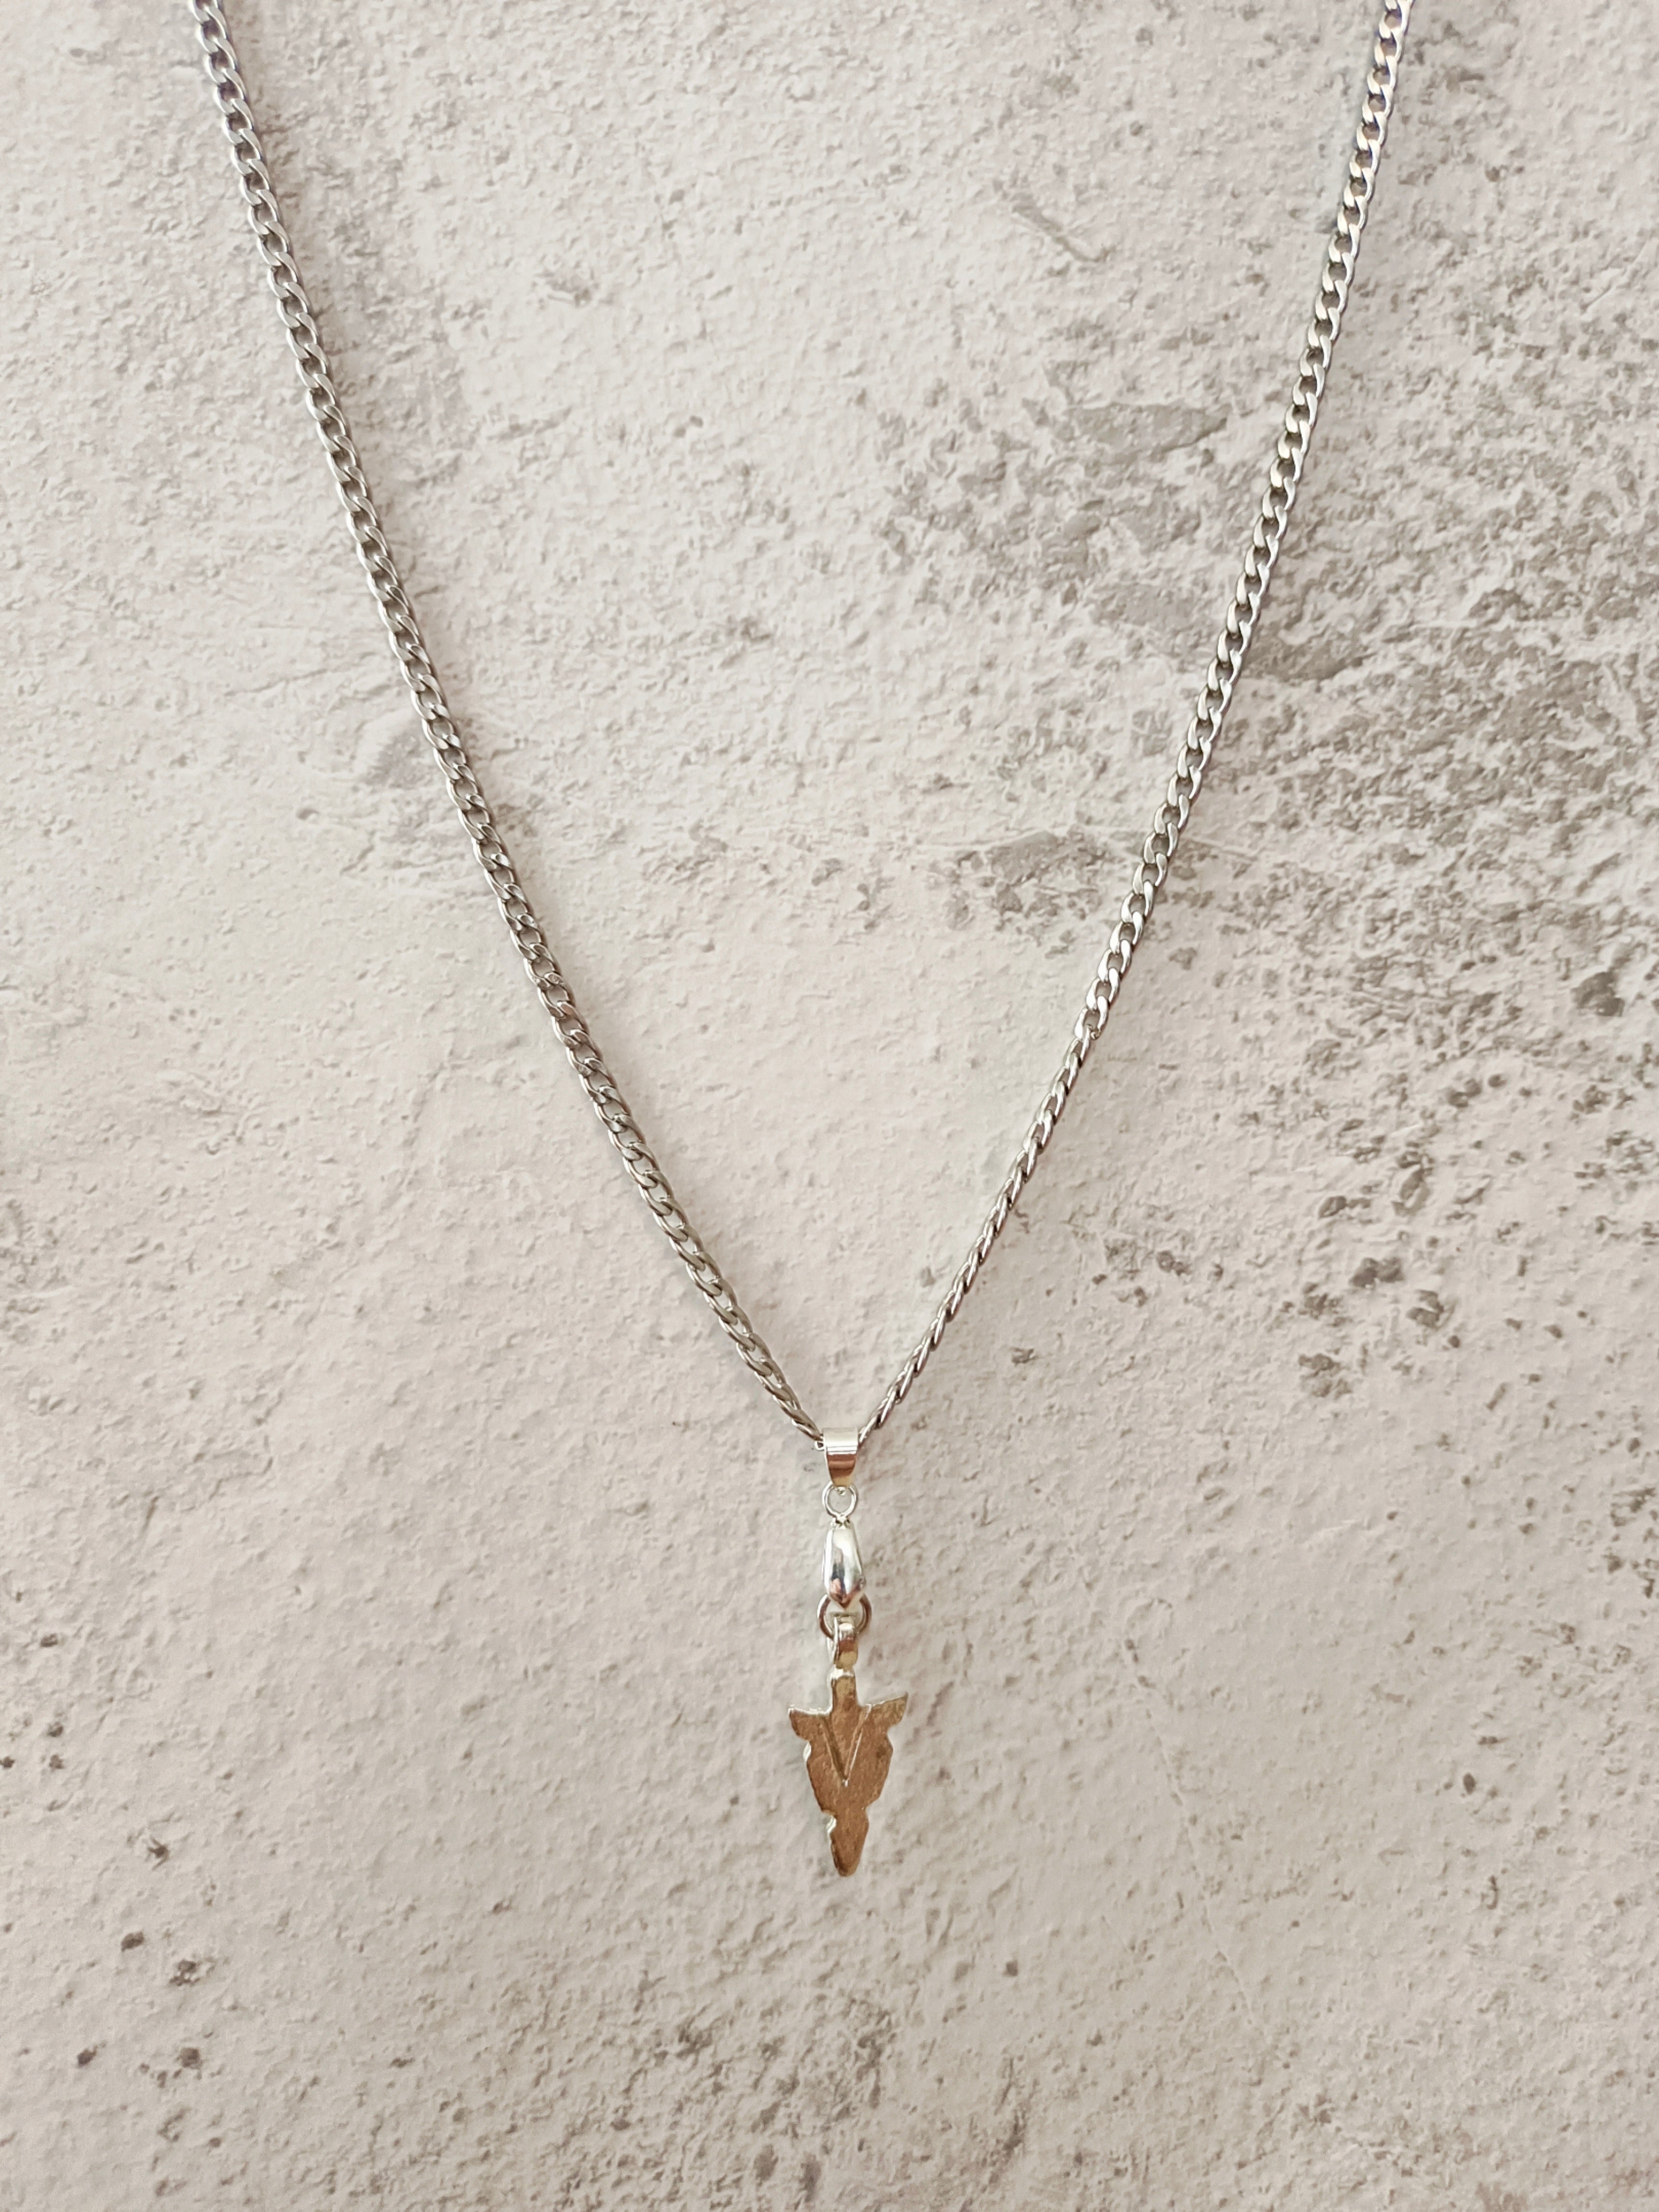 Leon | Delicate stainless steel gourmet necklace combined with a silver pendant of a dagger